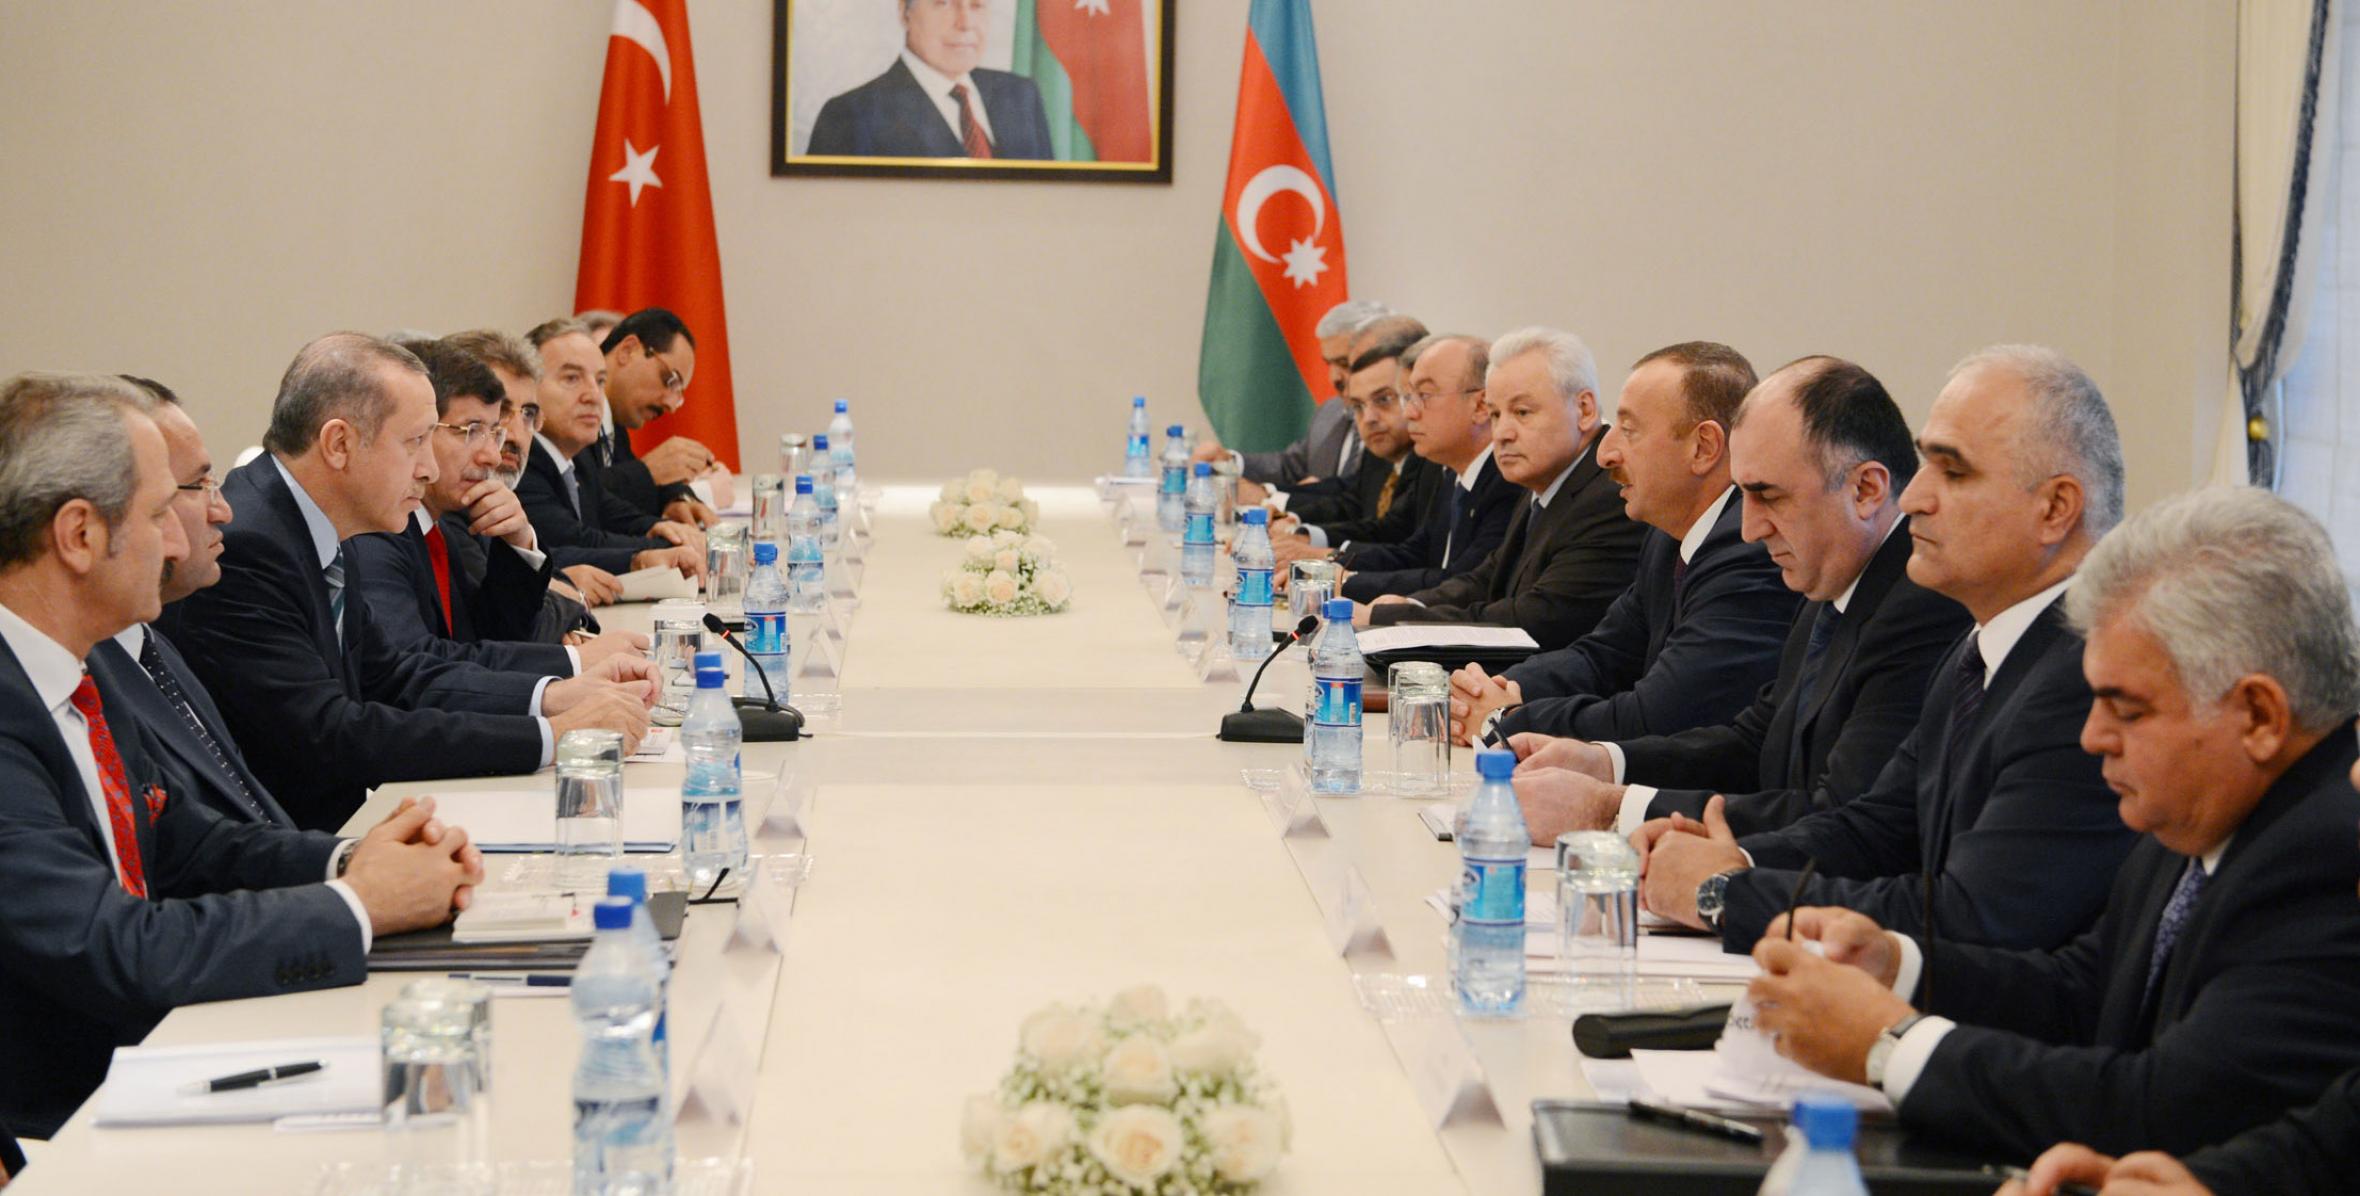 Second meeting of the High-Level Strategic Cooperation Council was held with the participation of Ilham Aliyev and Turkish Prime Minister Recep Tayyip Erdogan